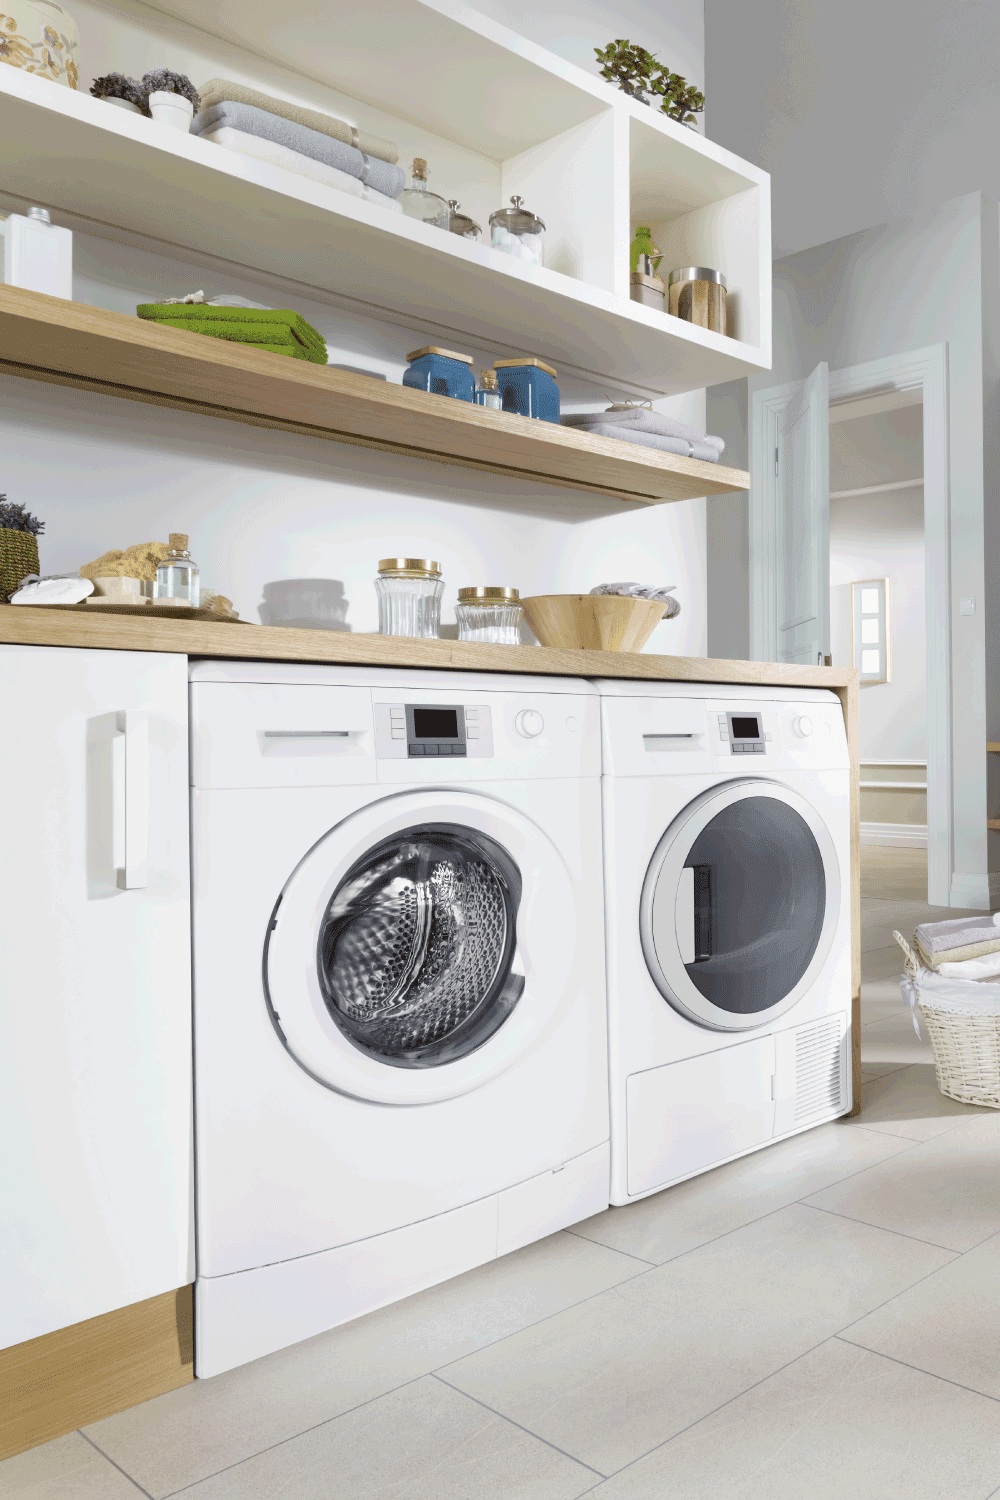 laundry room of a modern house with washer and dryer